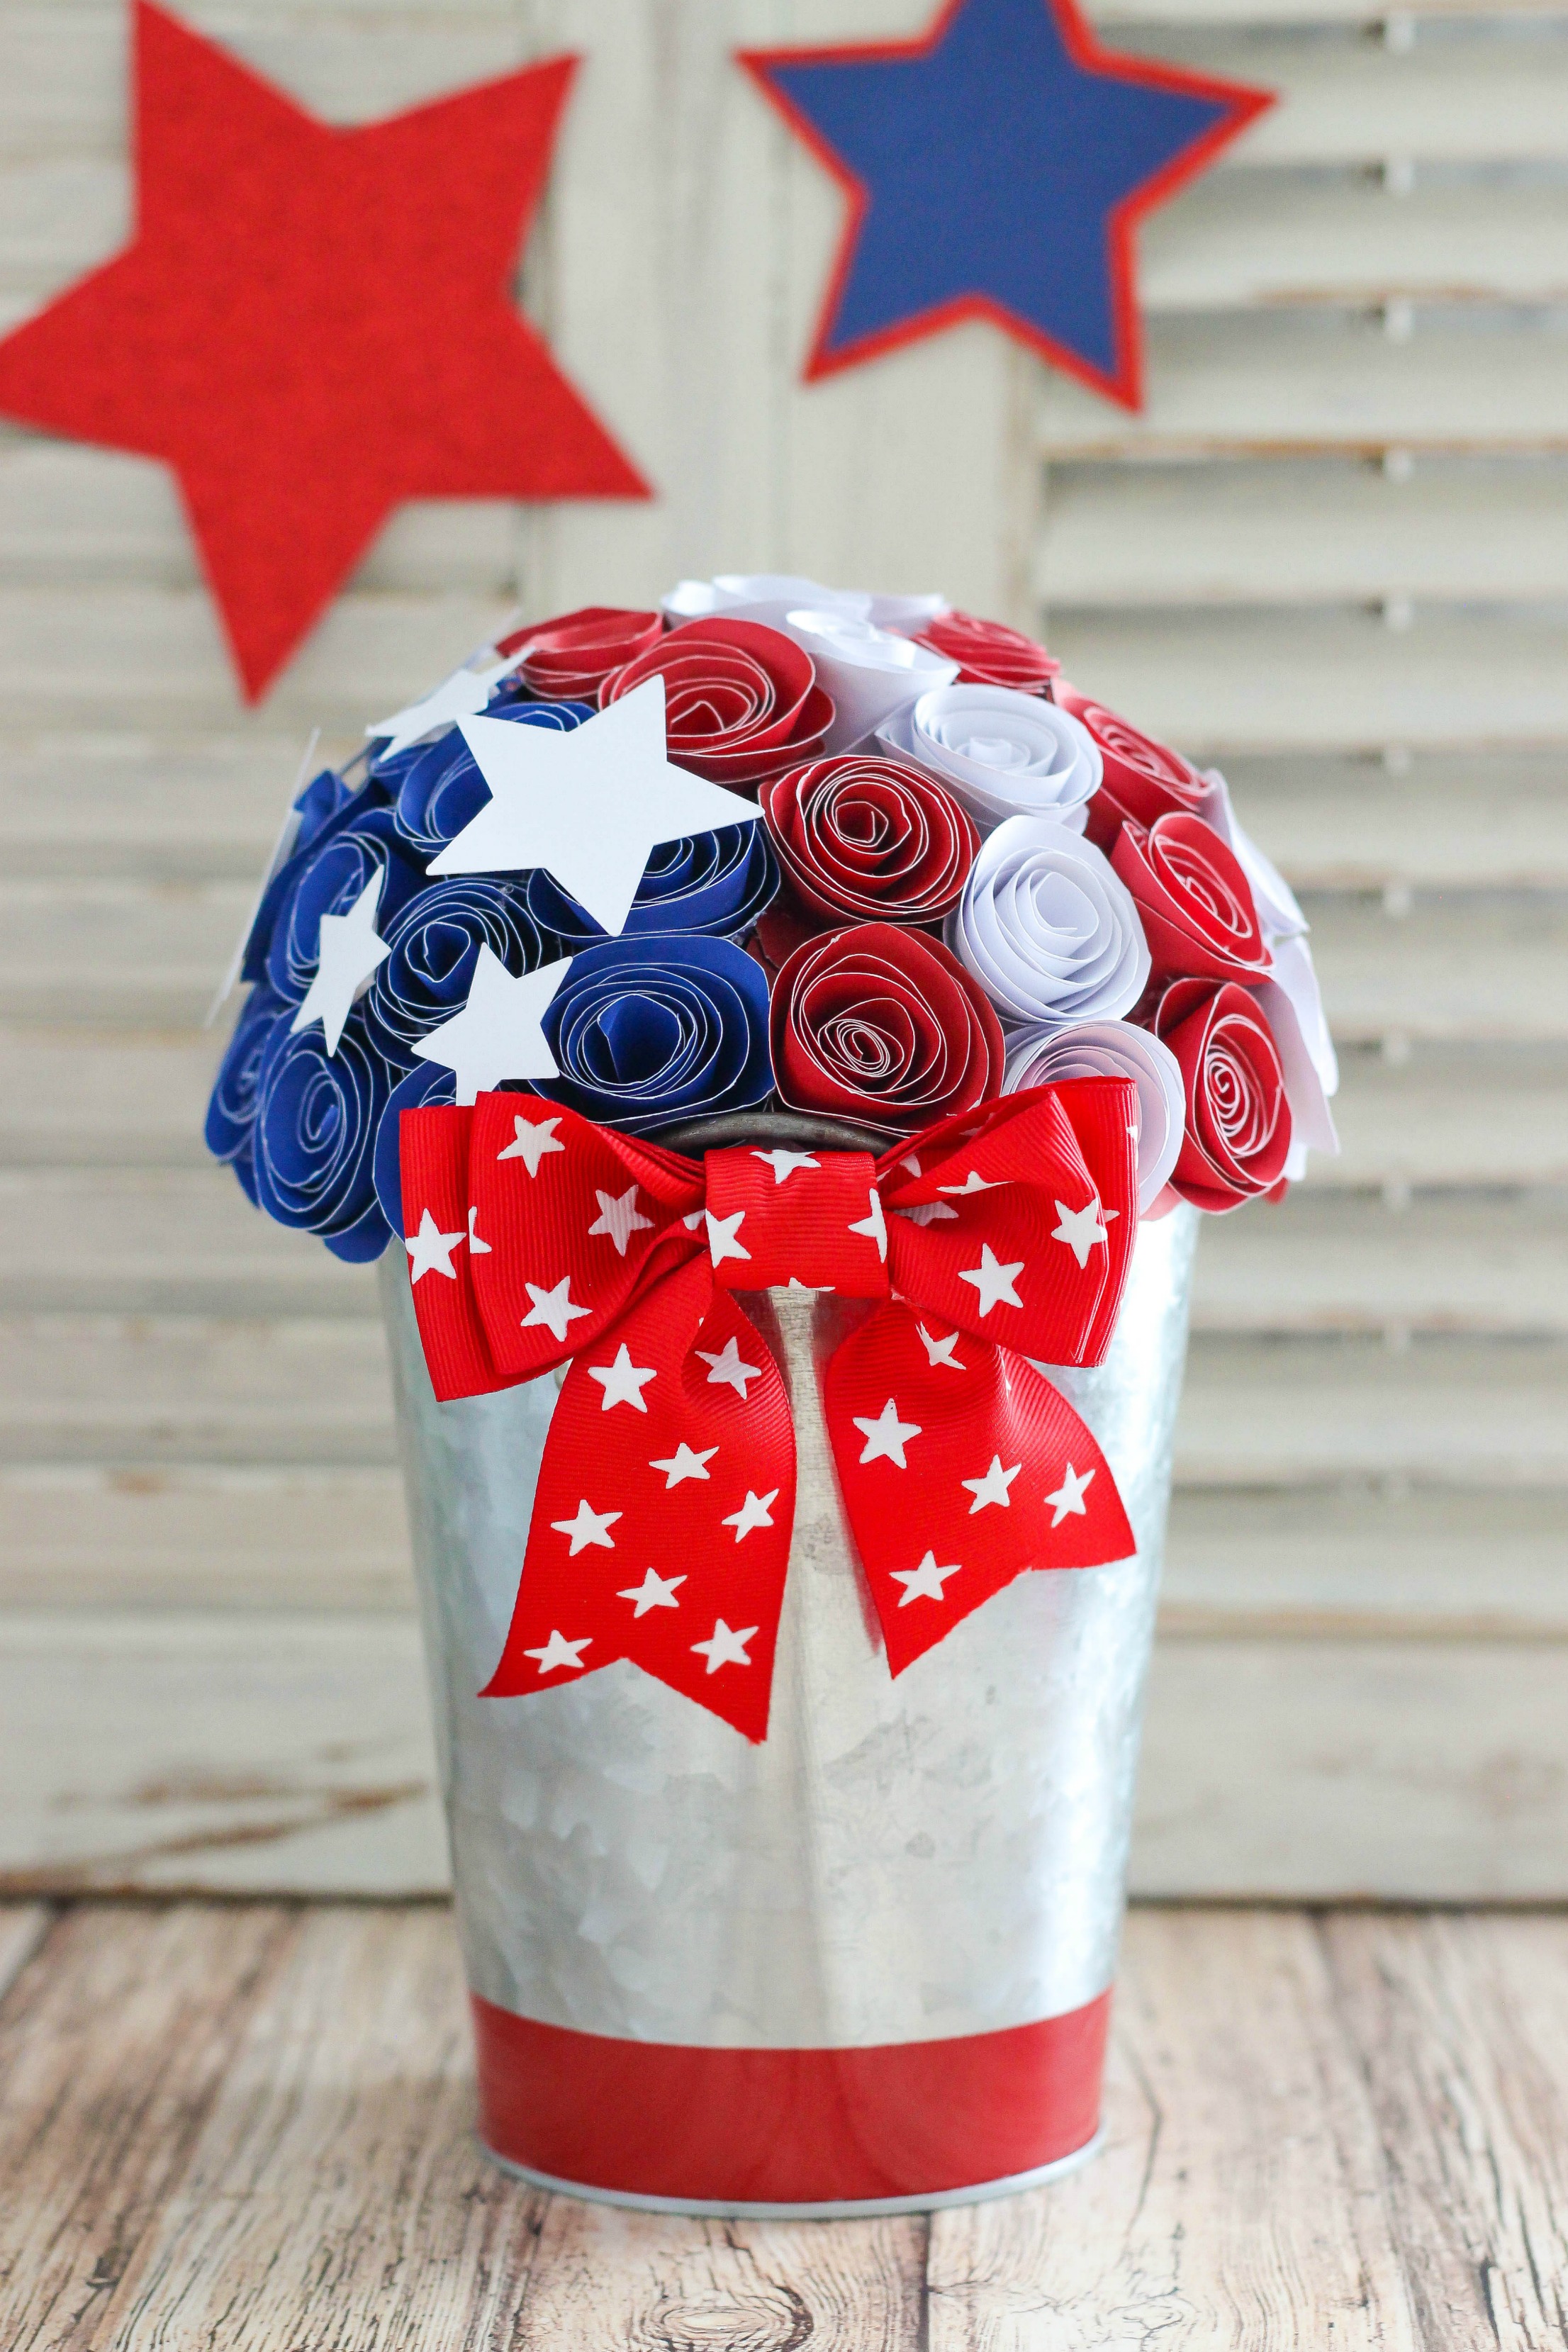 18 Super Cool DIY 4th of July Décor Ideas You Can Craft In The Last Minute